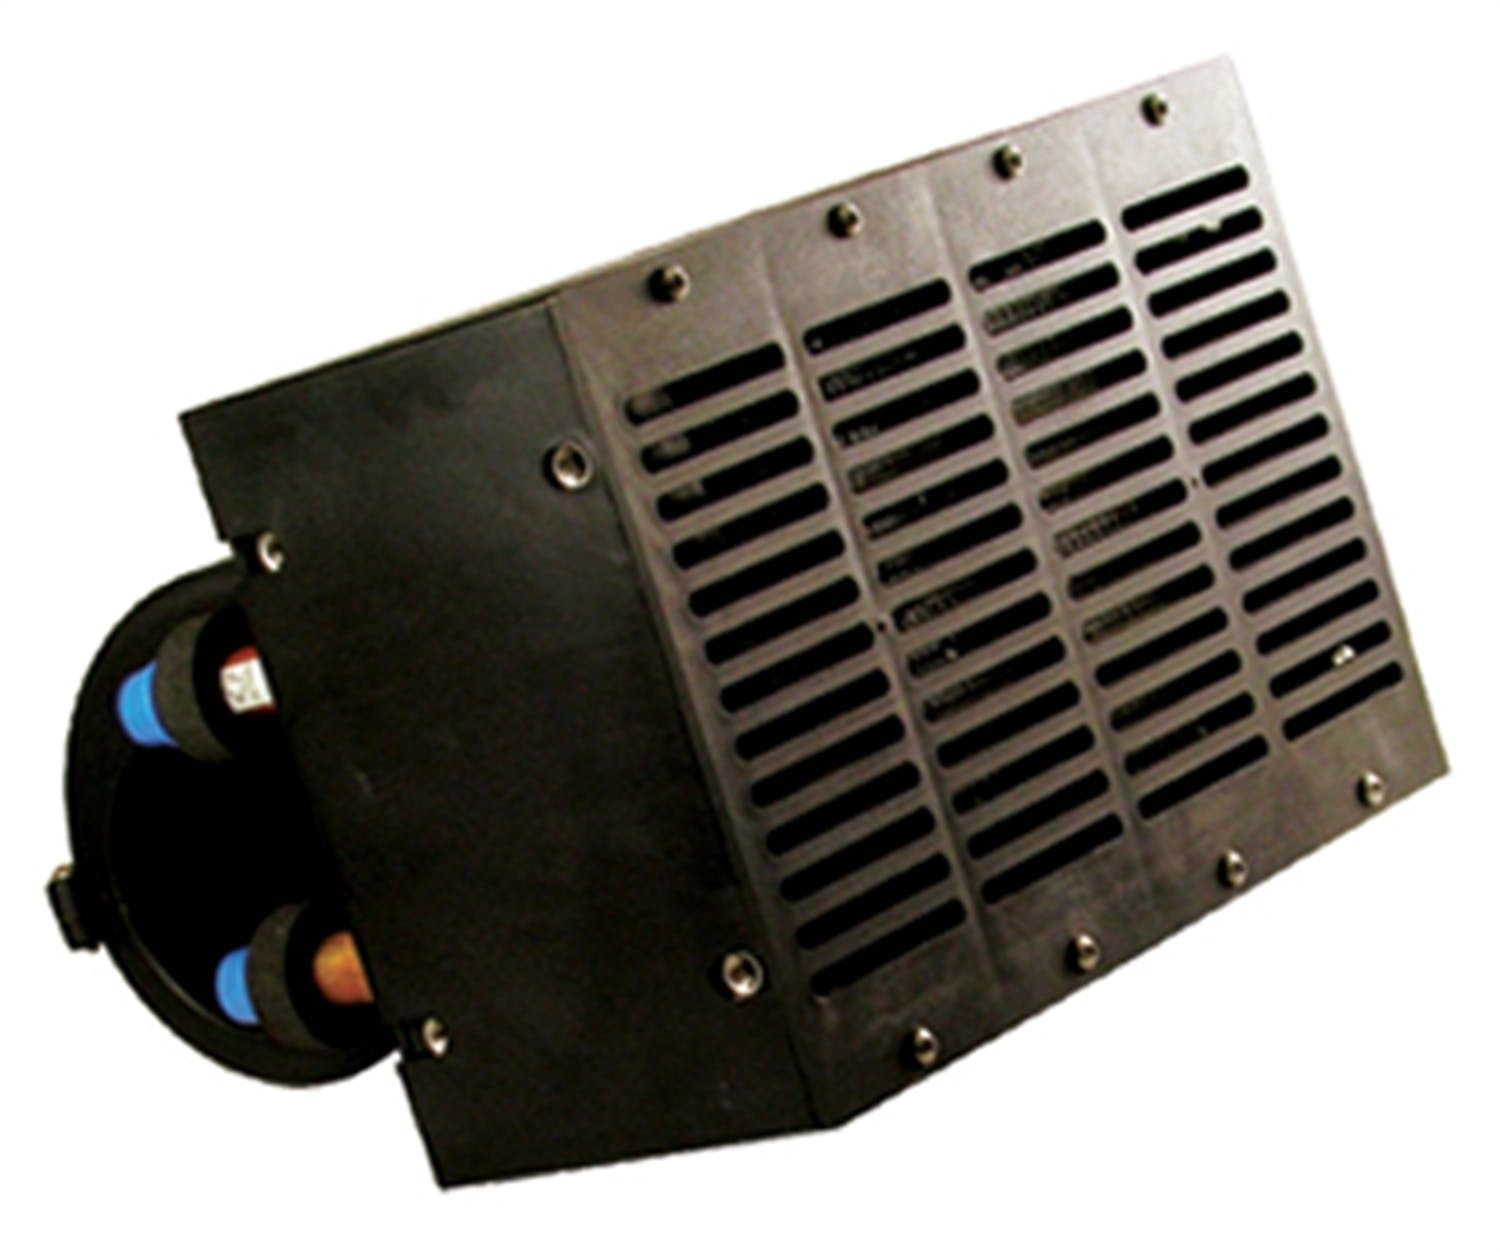 Maradyne MM-A1090004 Stoker™ 9 inch Heater with Grille face and switch kit, 26,000 BTU/hr.